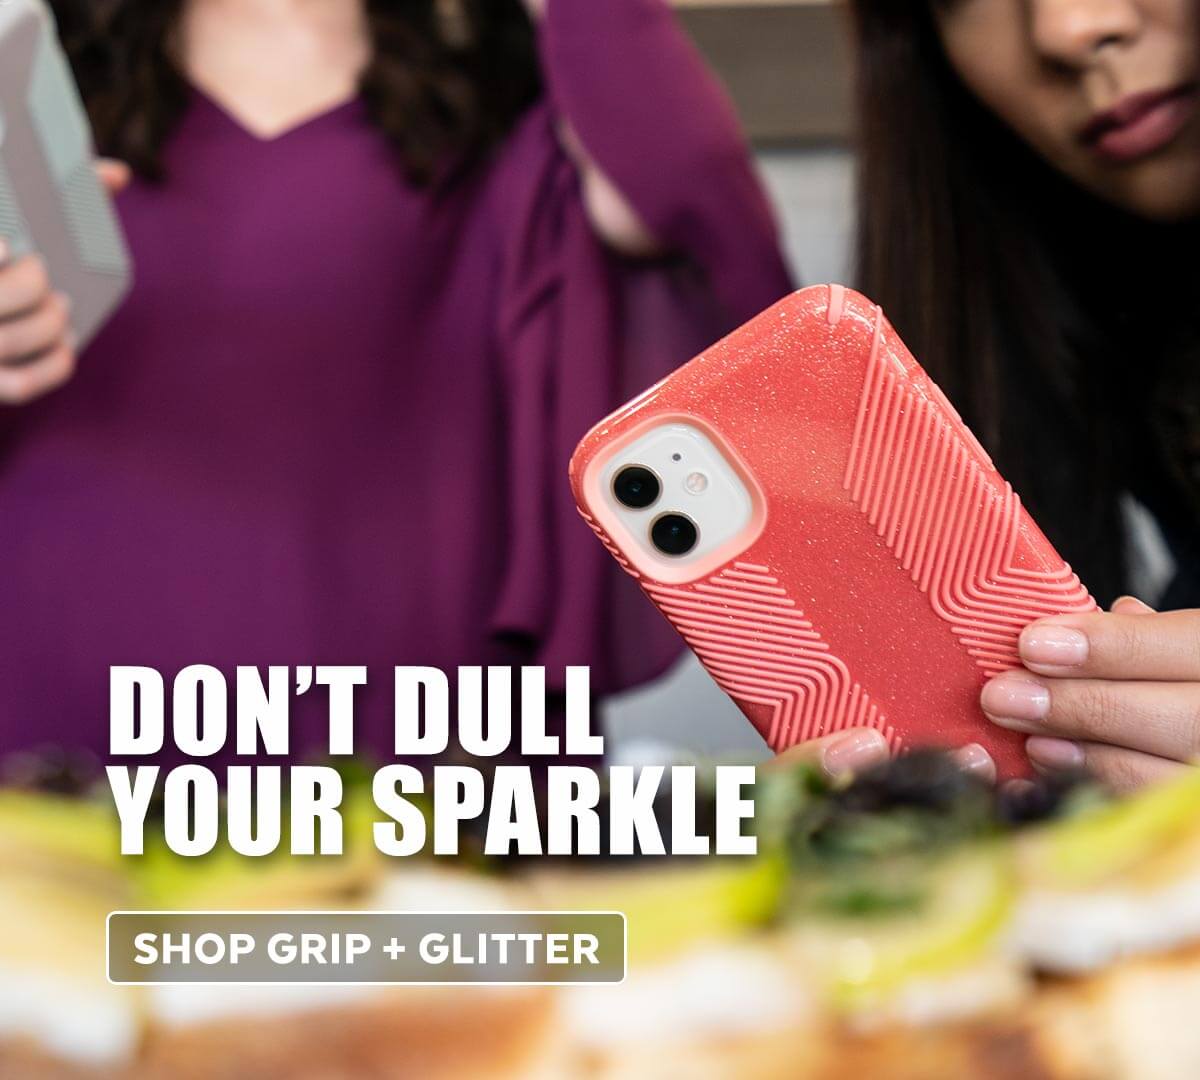 Don't dull your sparkle. Shop new iPhone cases.